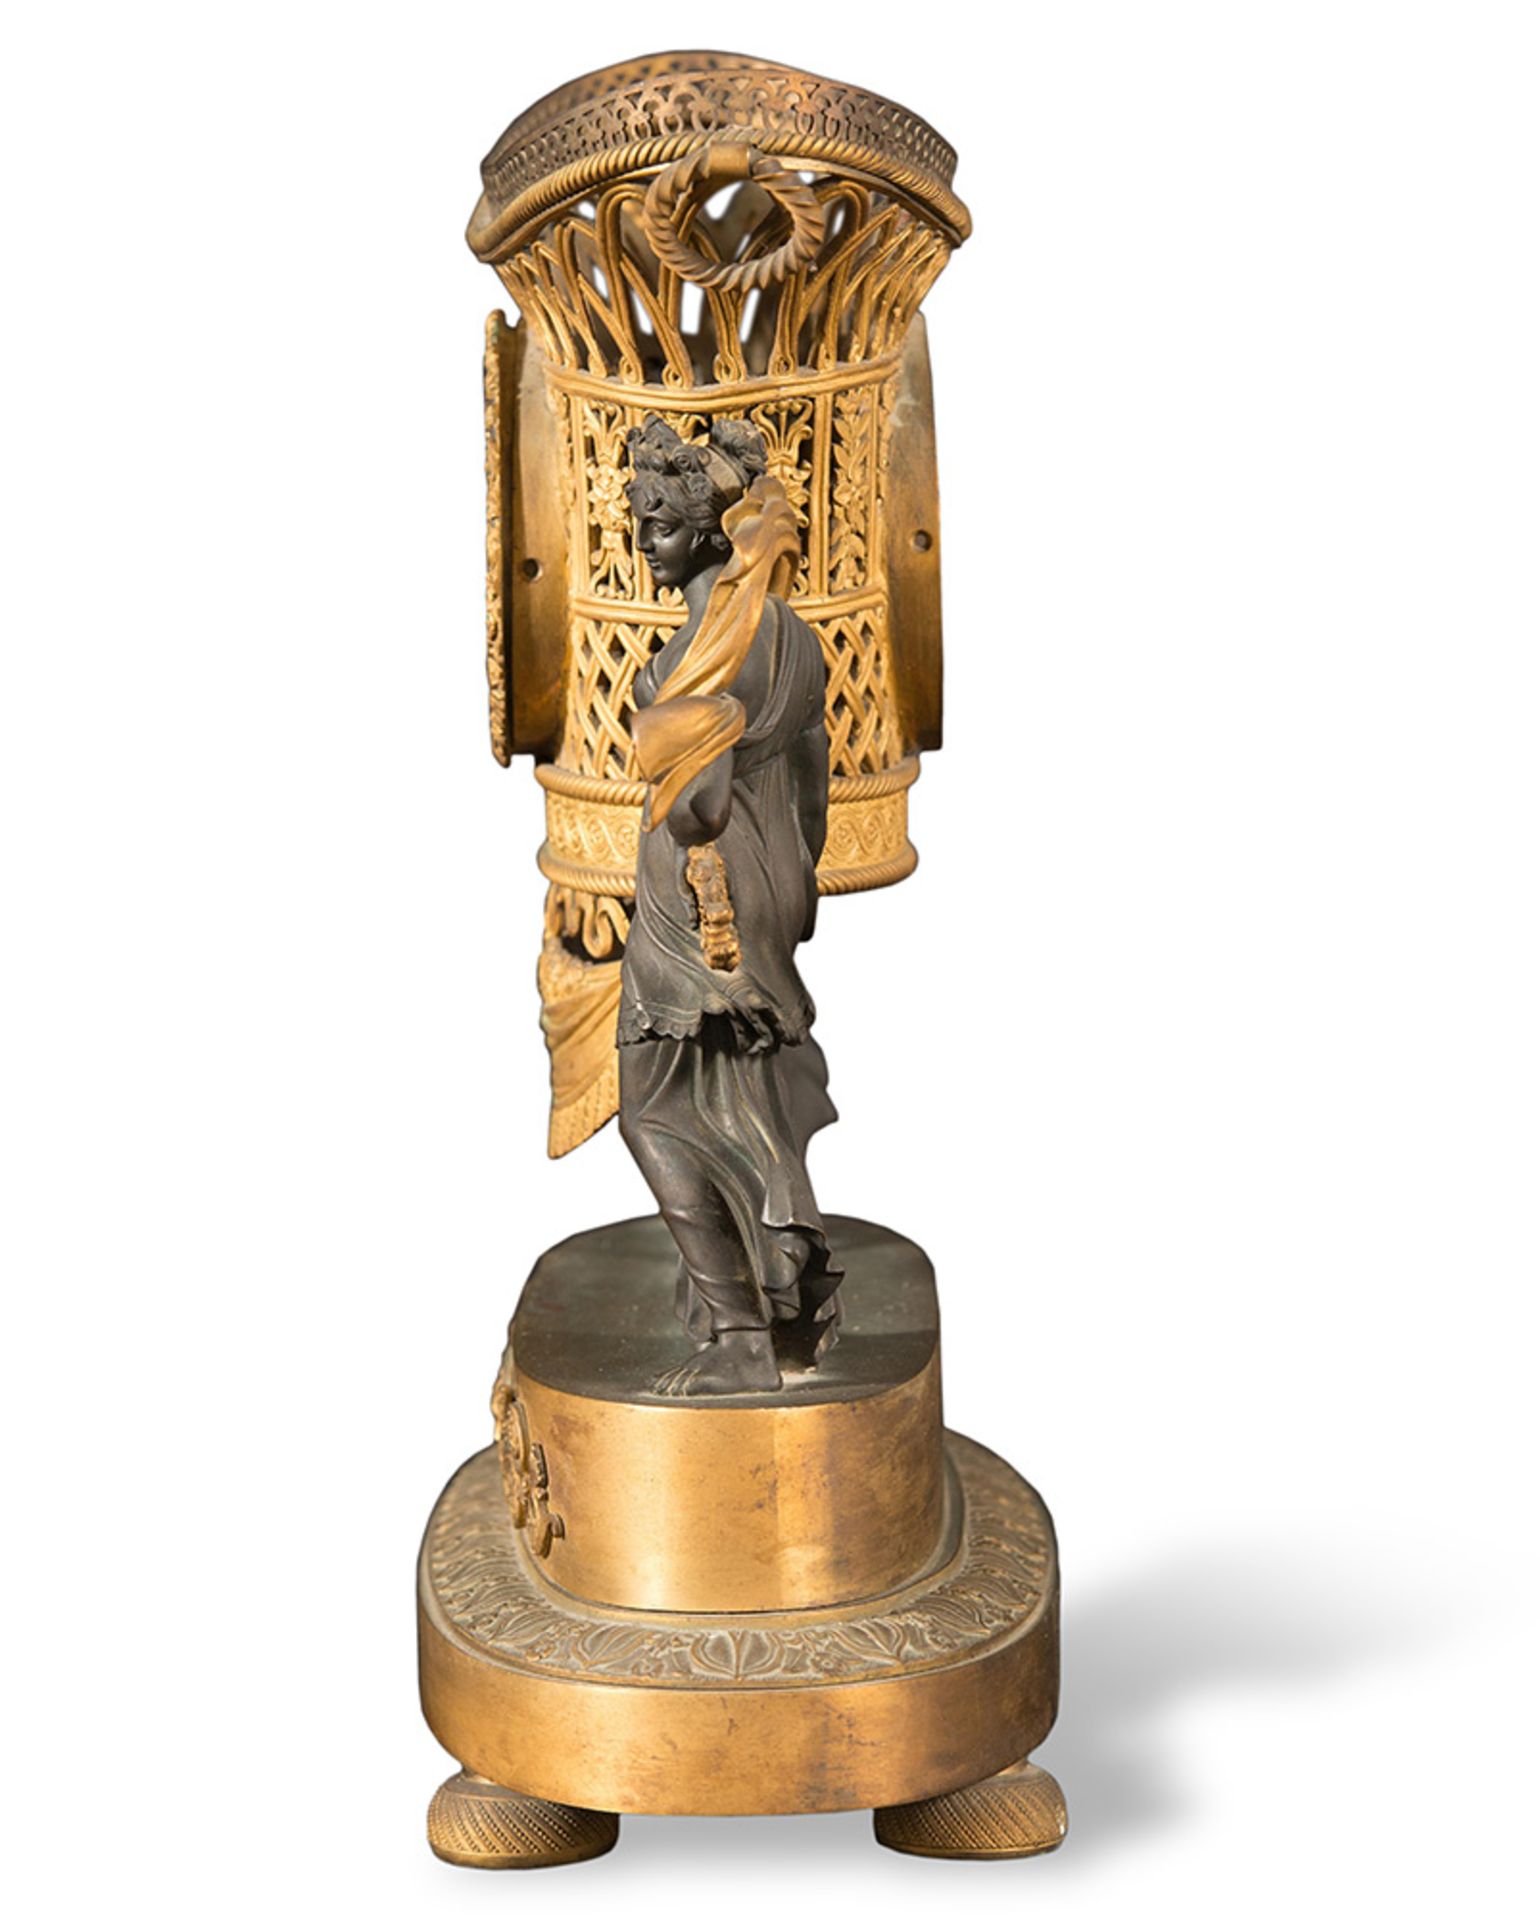 Gilt bronze and patinated clock, 19th Century - Image 2 of 2